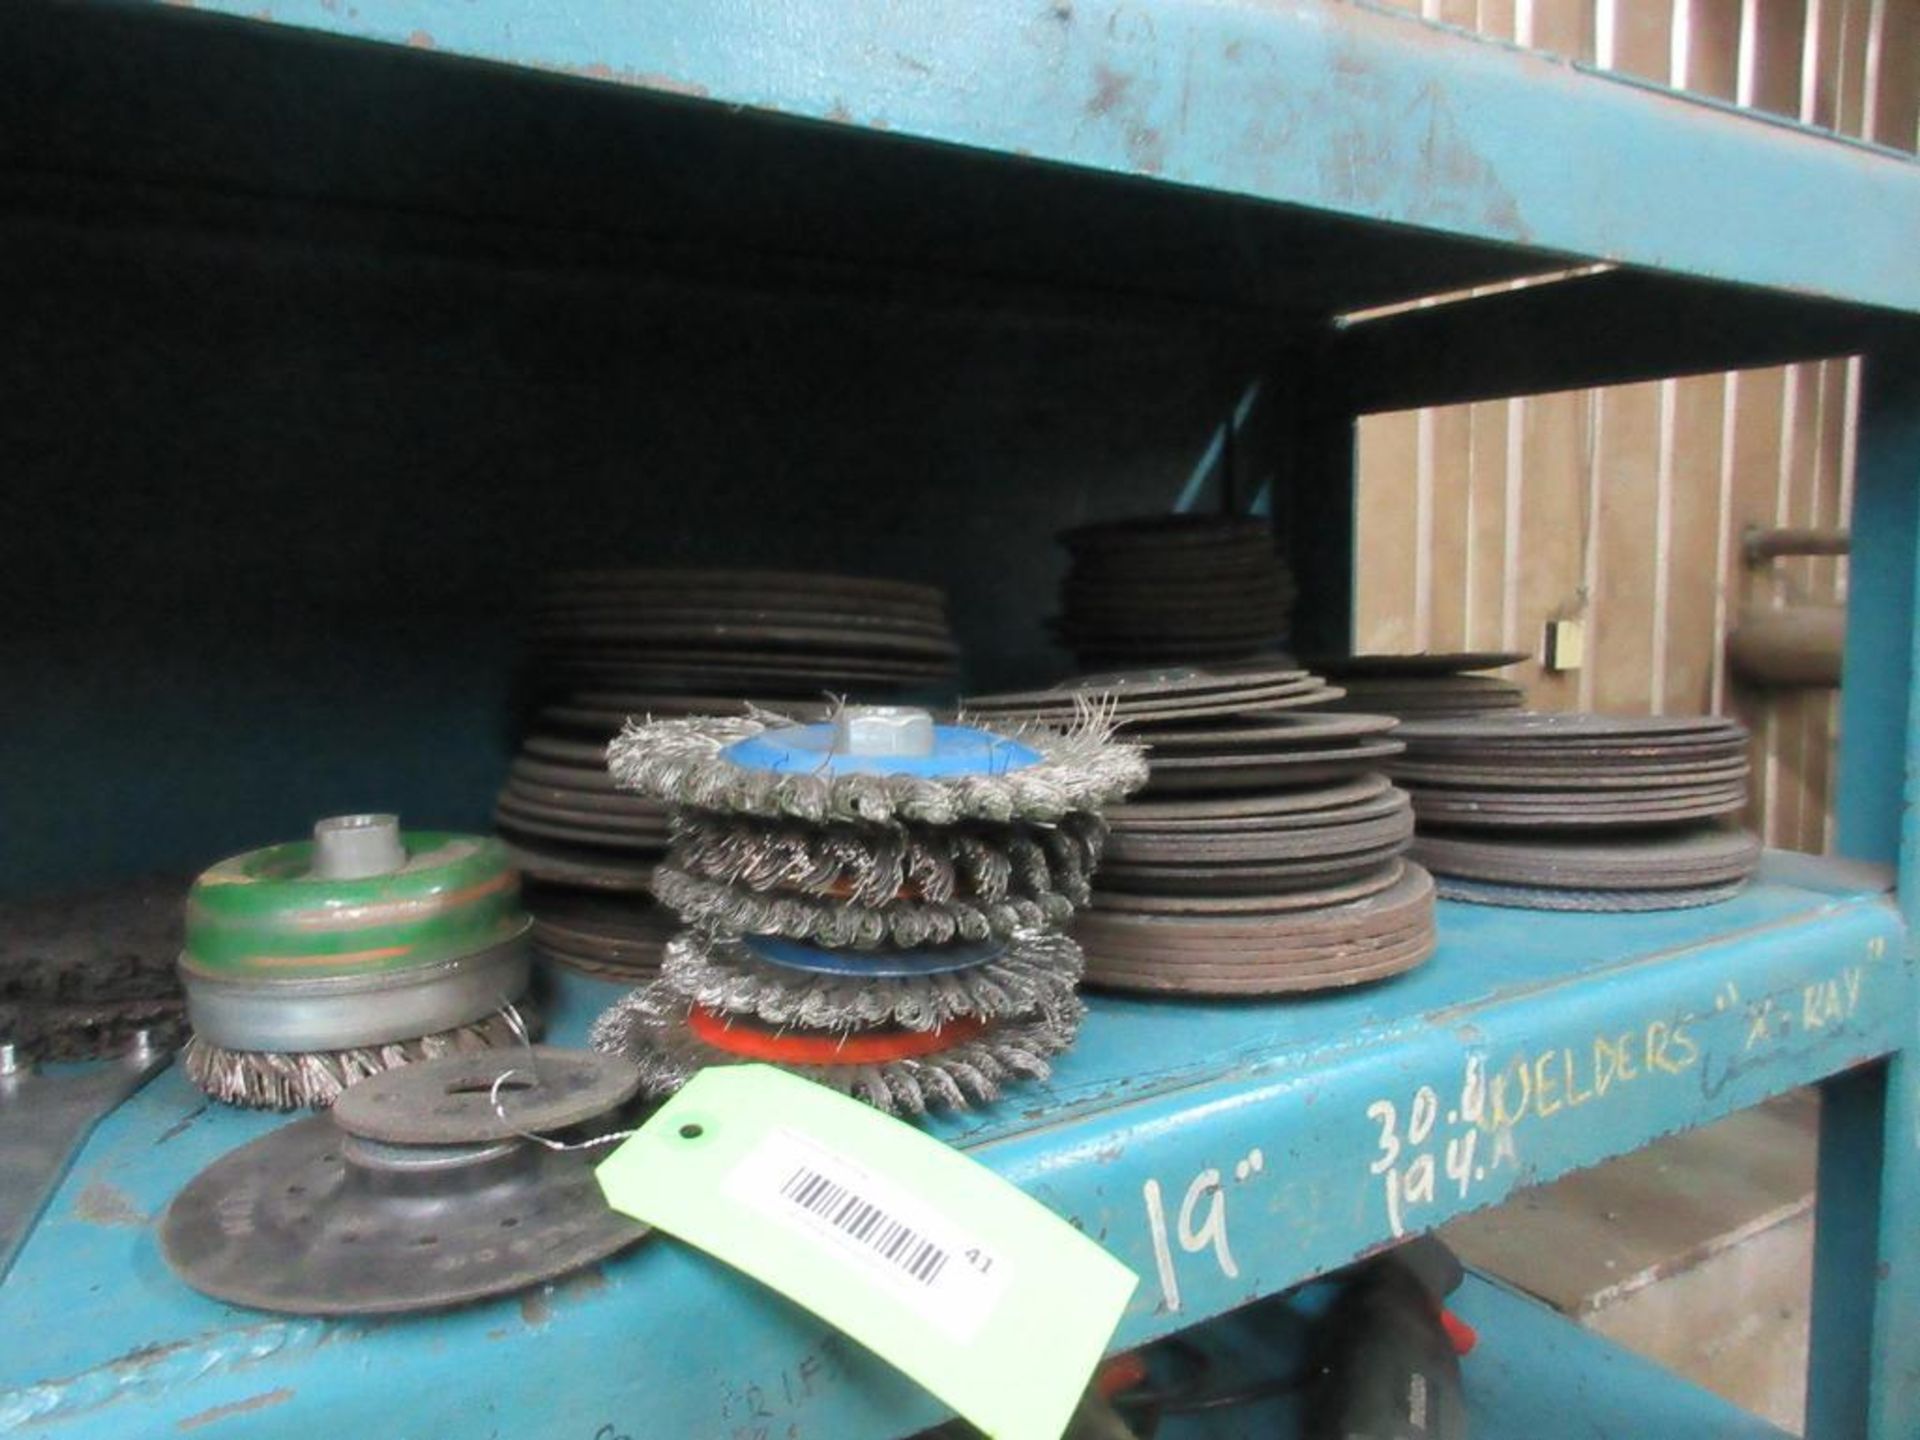 LOT OF WIRE WHEEL AND GRINDING DISKS (7" AND 5") (IN CENTRAL TOOL CRIB)